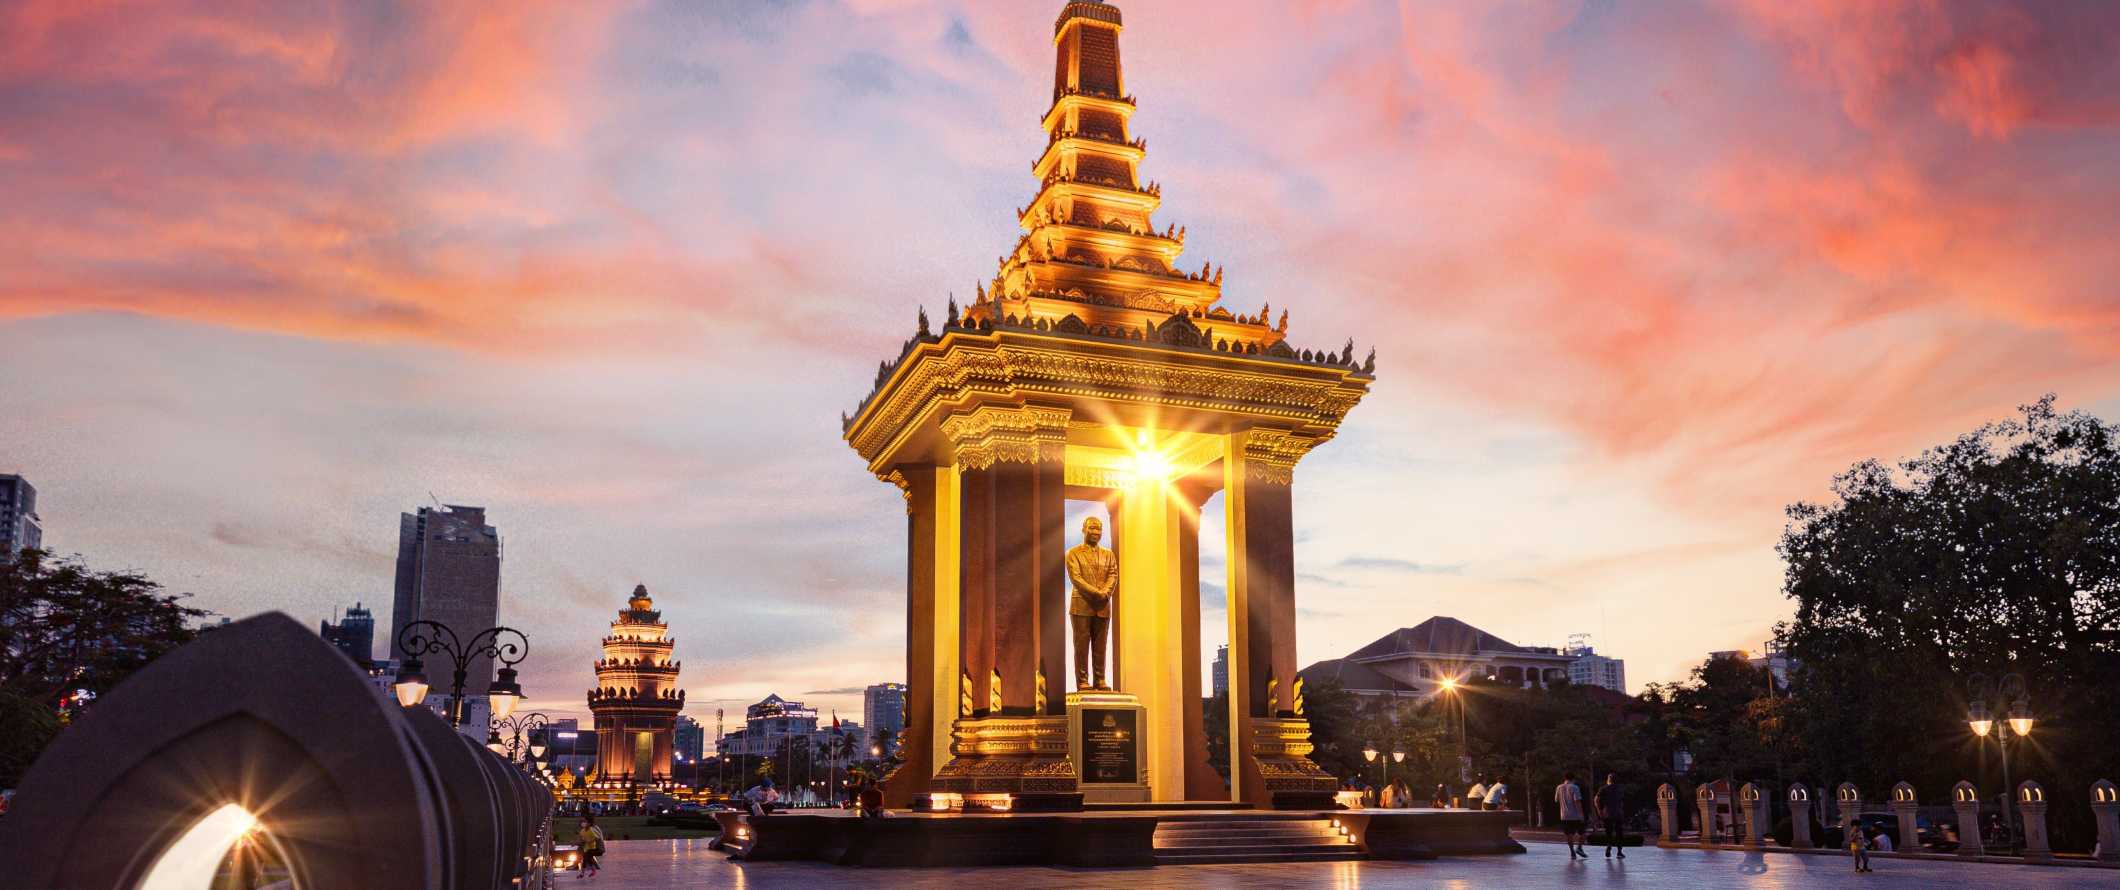 The golden statue of late King Father Norodom Sihanouk, a major landmark in Phnom Penh, Cambodia at sunset